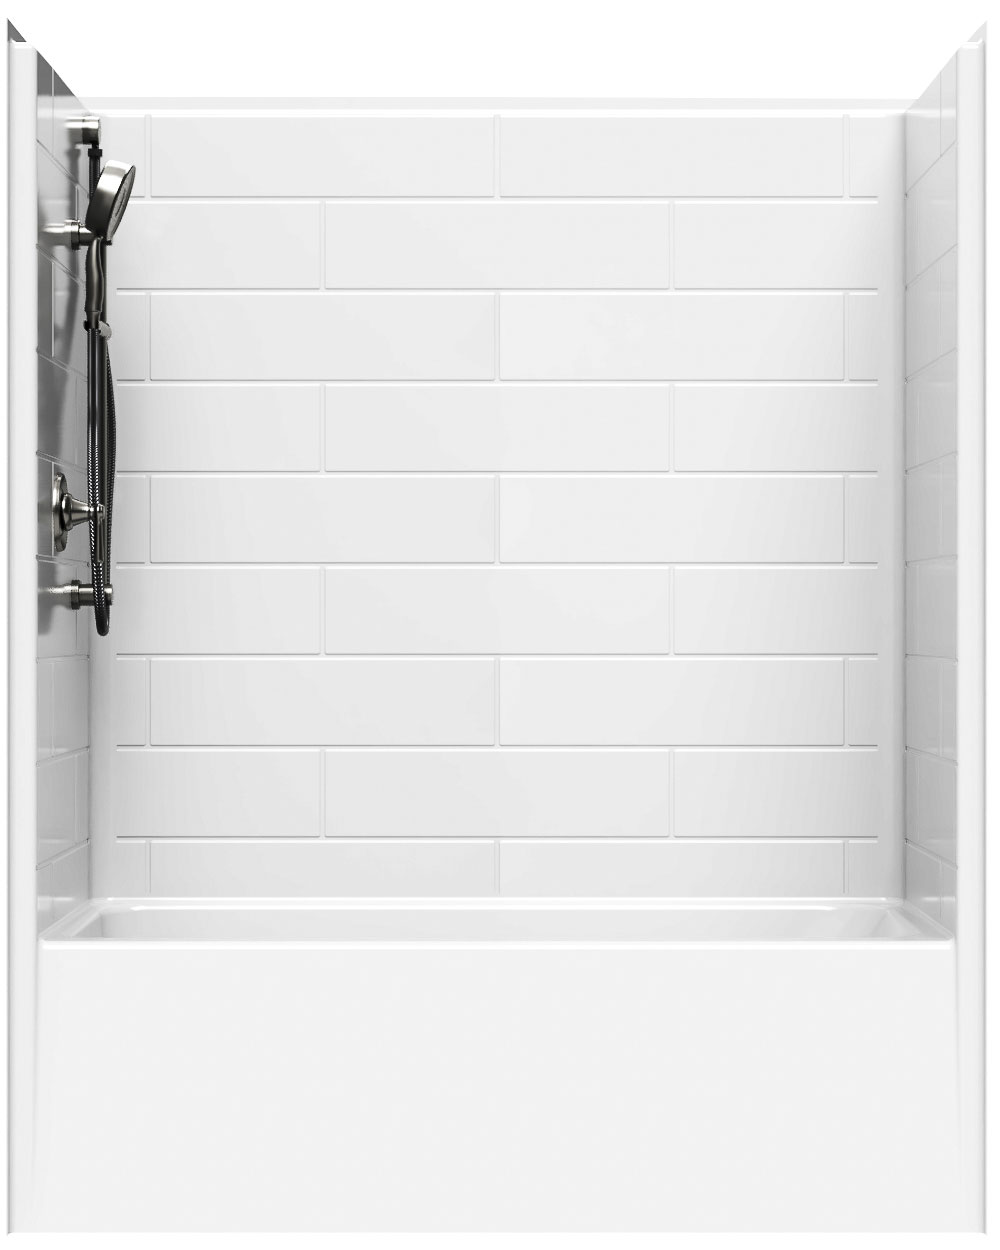 5’ Tub-Shower With Simulated Tile